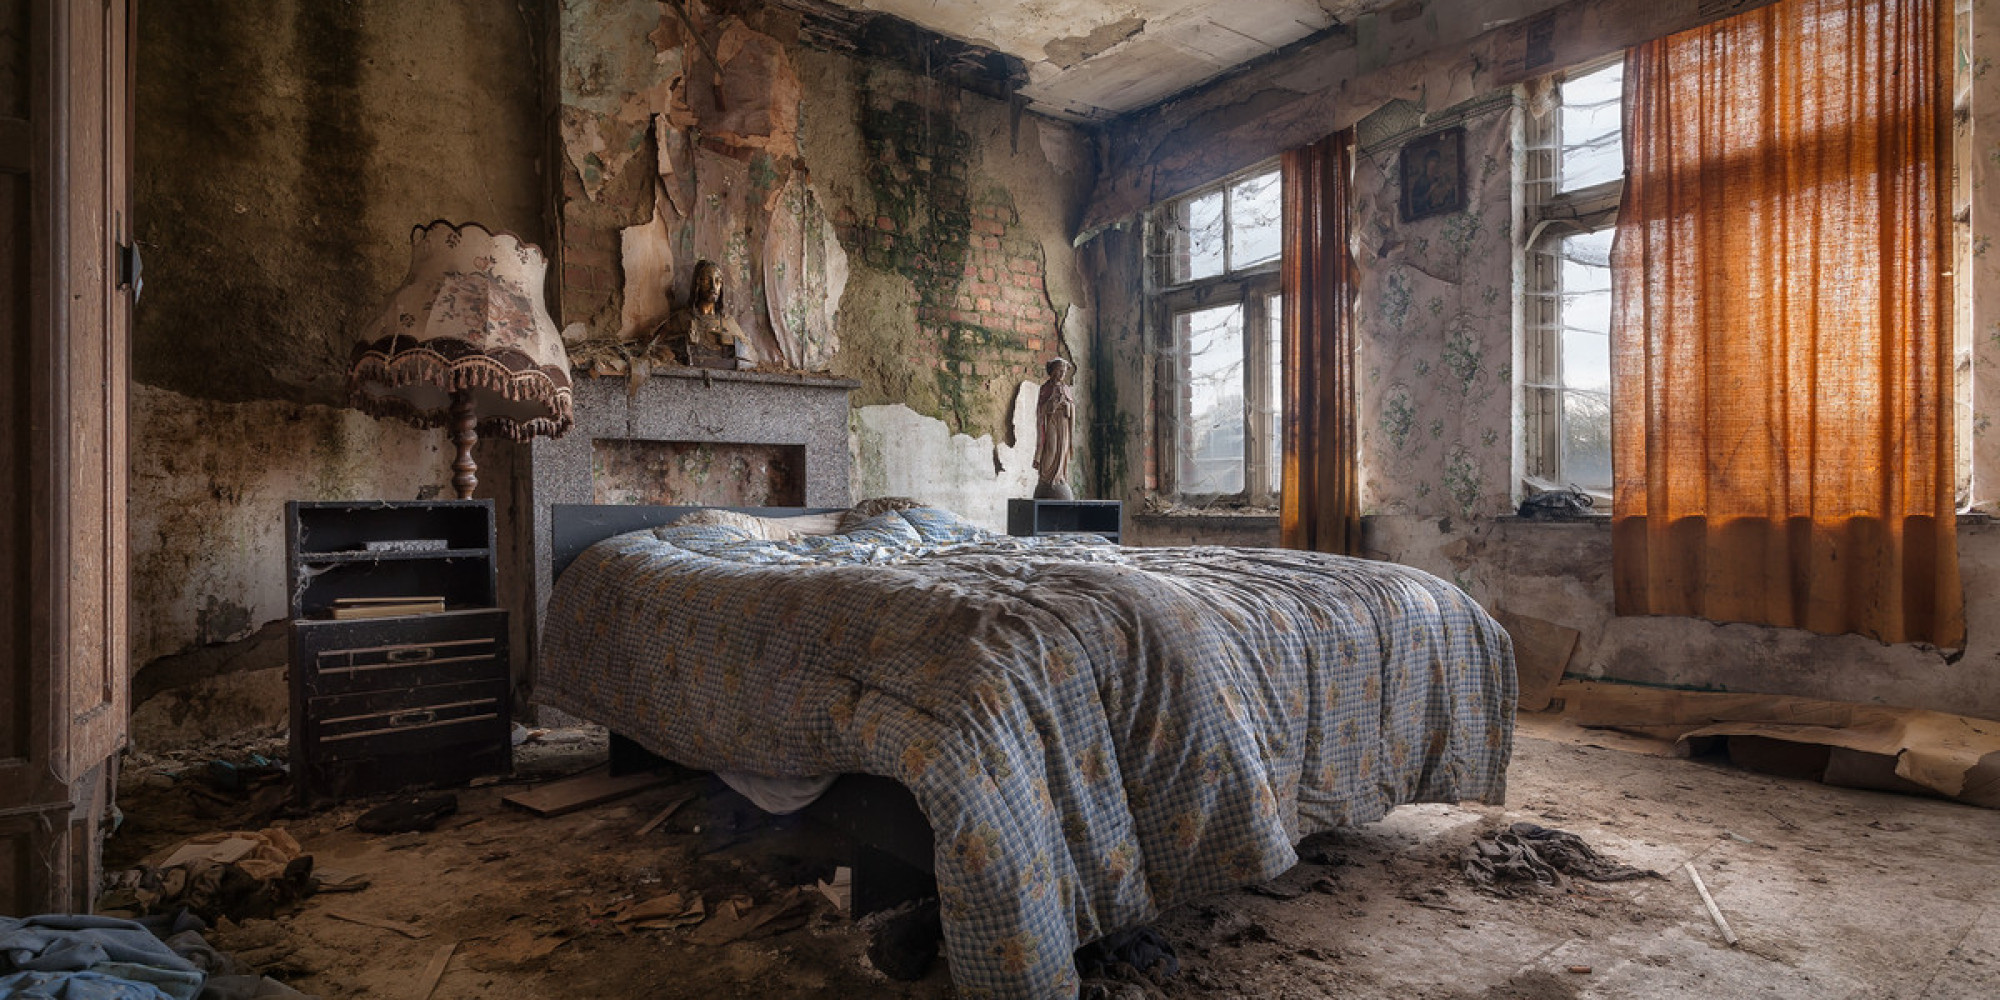 Stunning Abandoned Homes Are Surprisingly Full Of Life | HuffPost